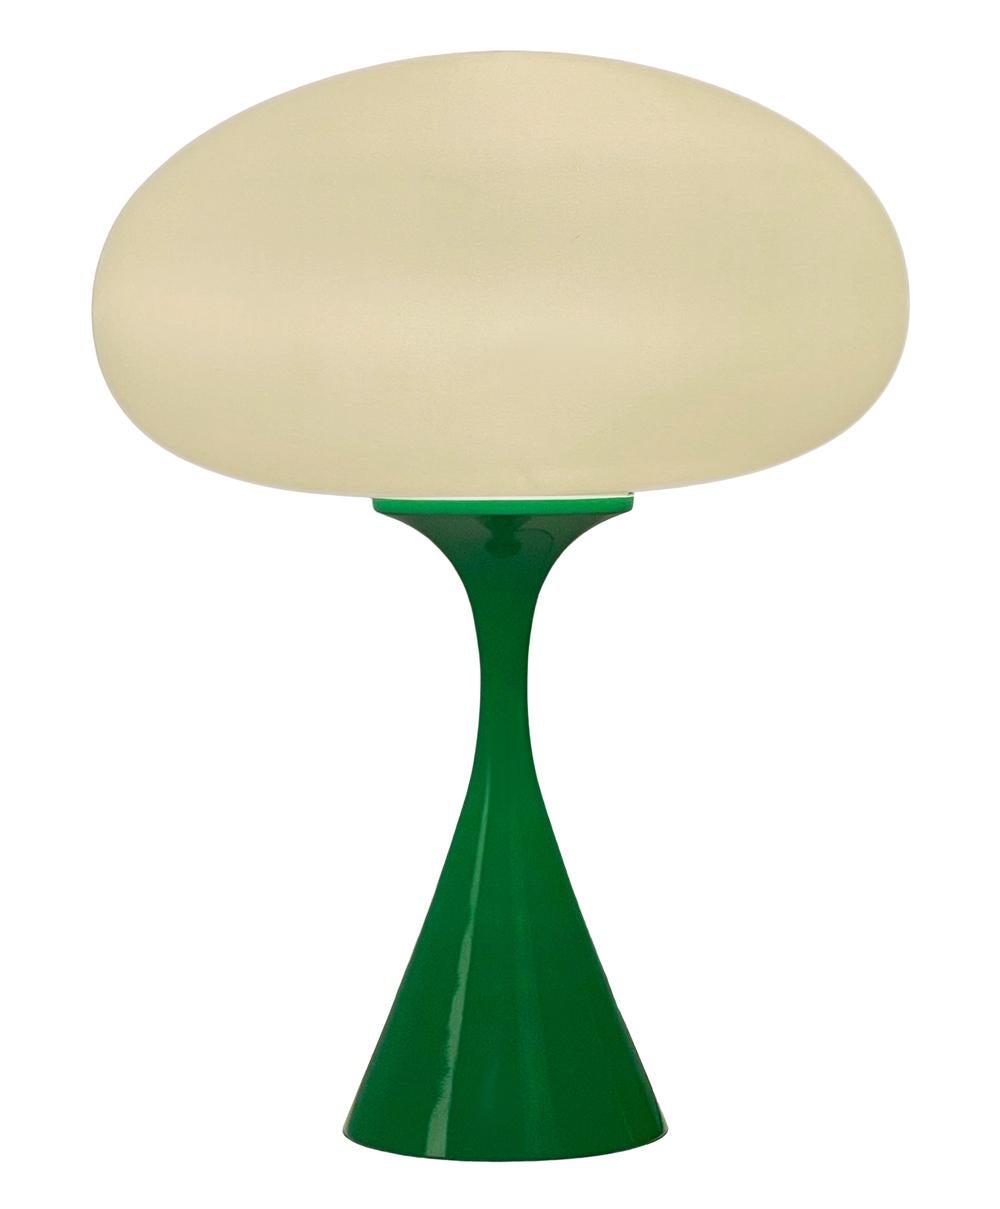 A handsome table lamp in a conical mushroom form after Laurel Lamp Company. The lamp features a cast aluminum base with a green powder coat and a mouth blown frosted glass lamp shade.